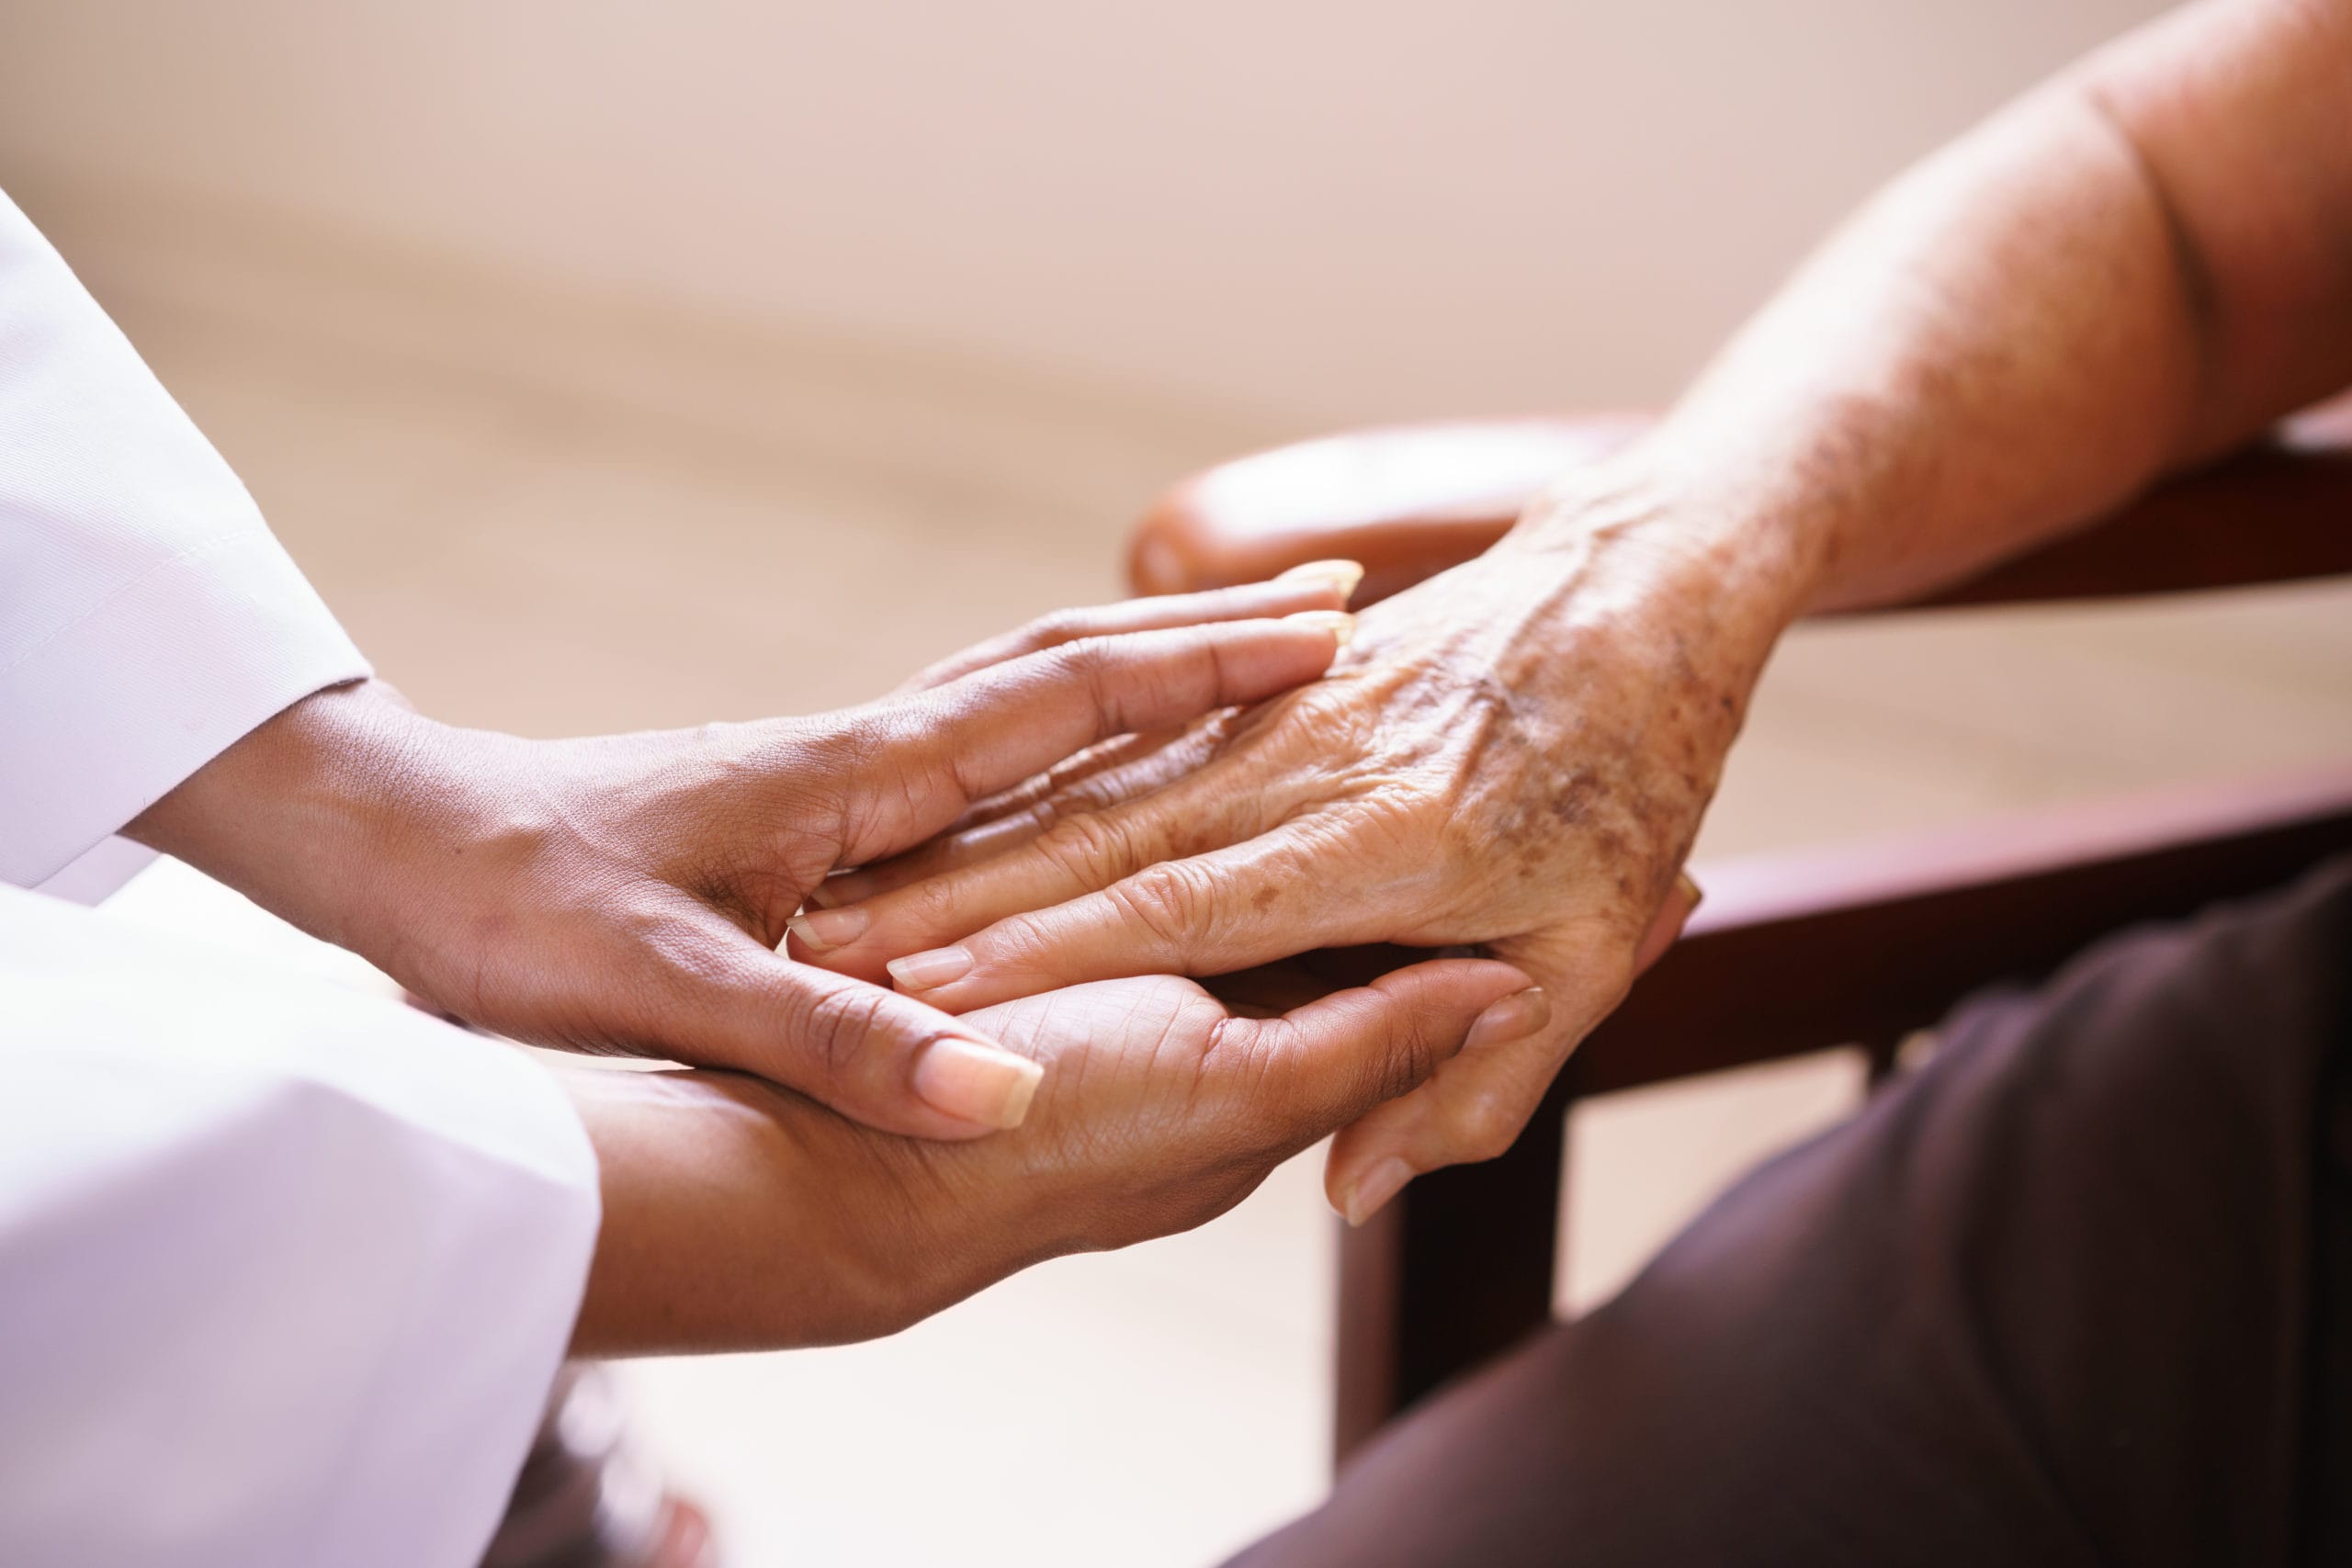 Growing together at the end of life: Having honest, emotional conversations